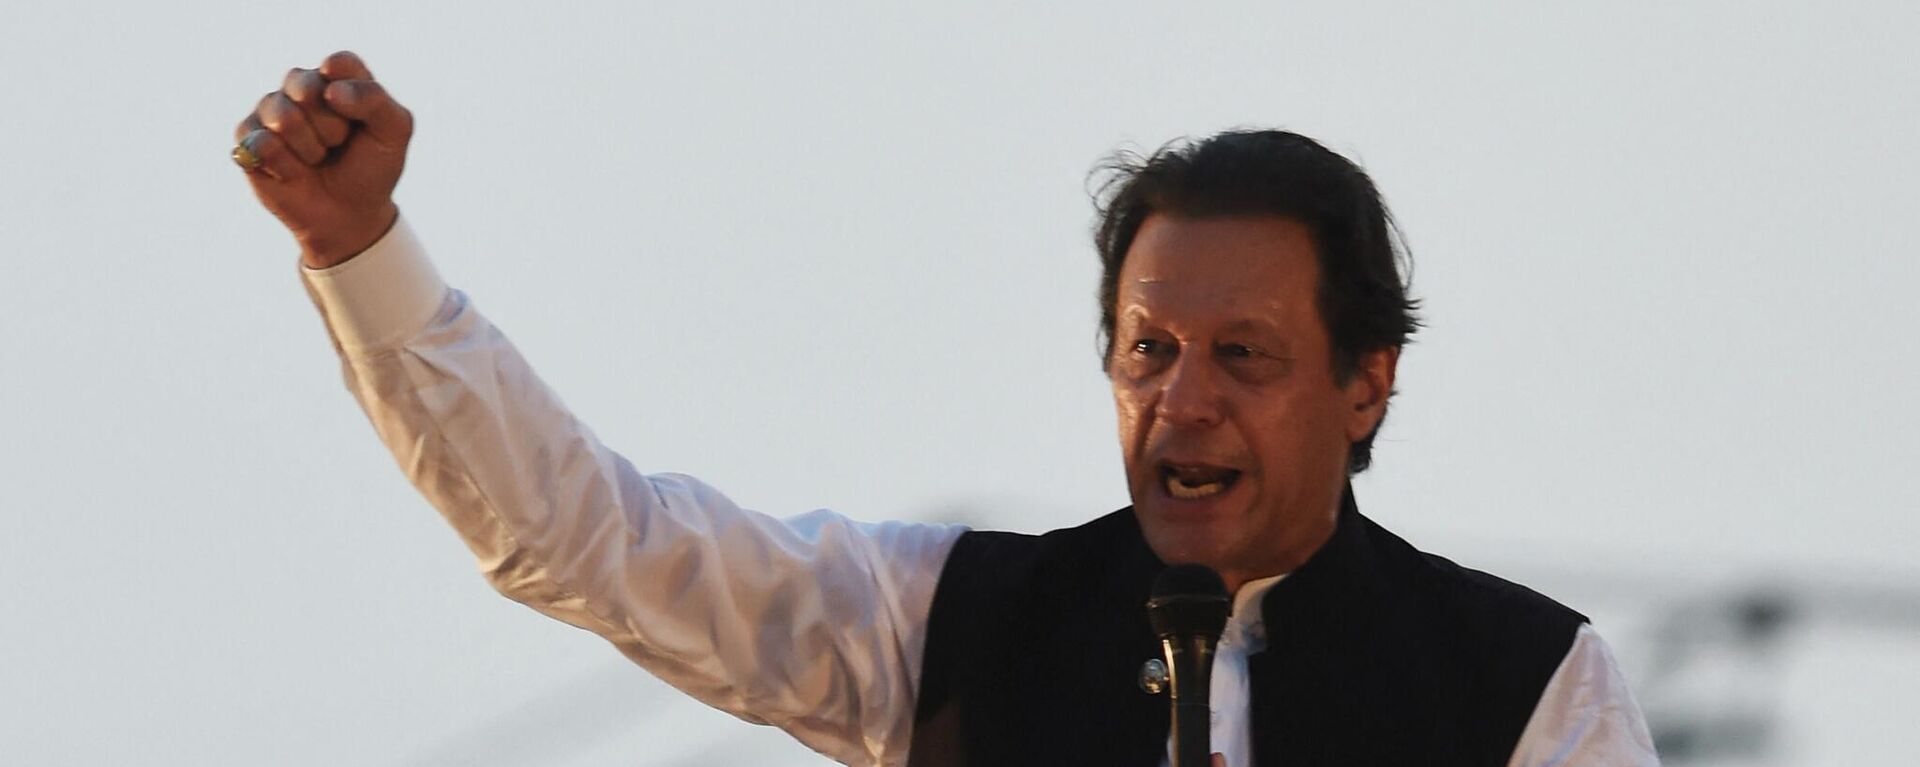 Former Pakistan's prime minister Imran Khan gestures as he speaks during a lawyers convention in Lahore on September 21, 2022. - Sputnik International, 1920, 28.09.2022